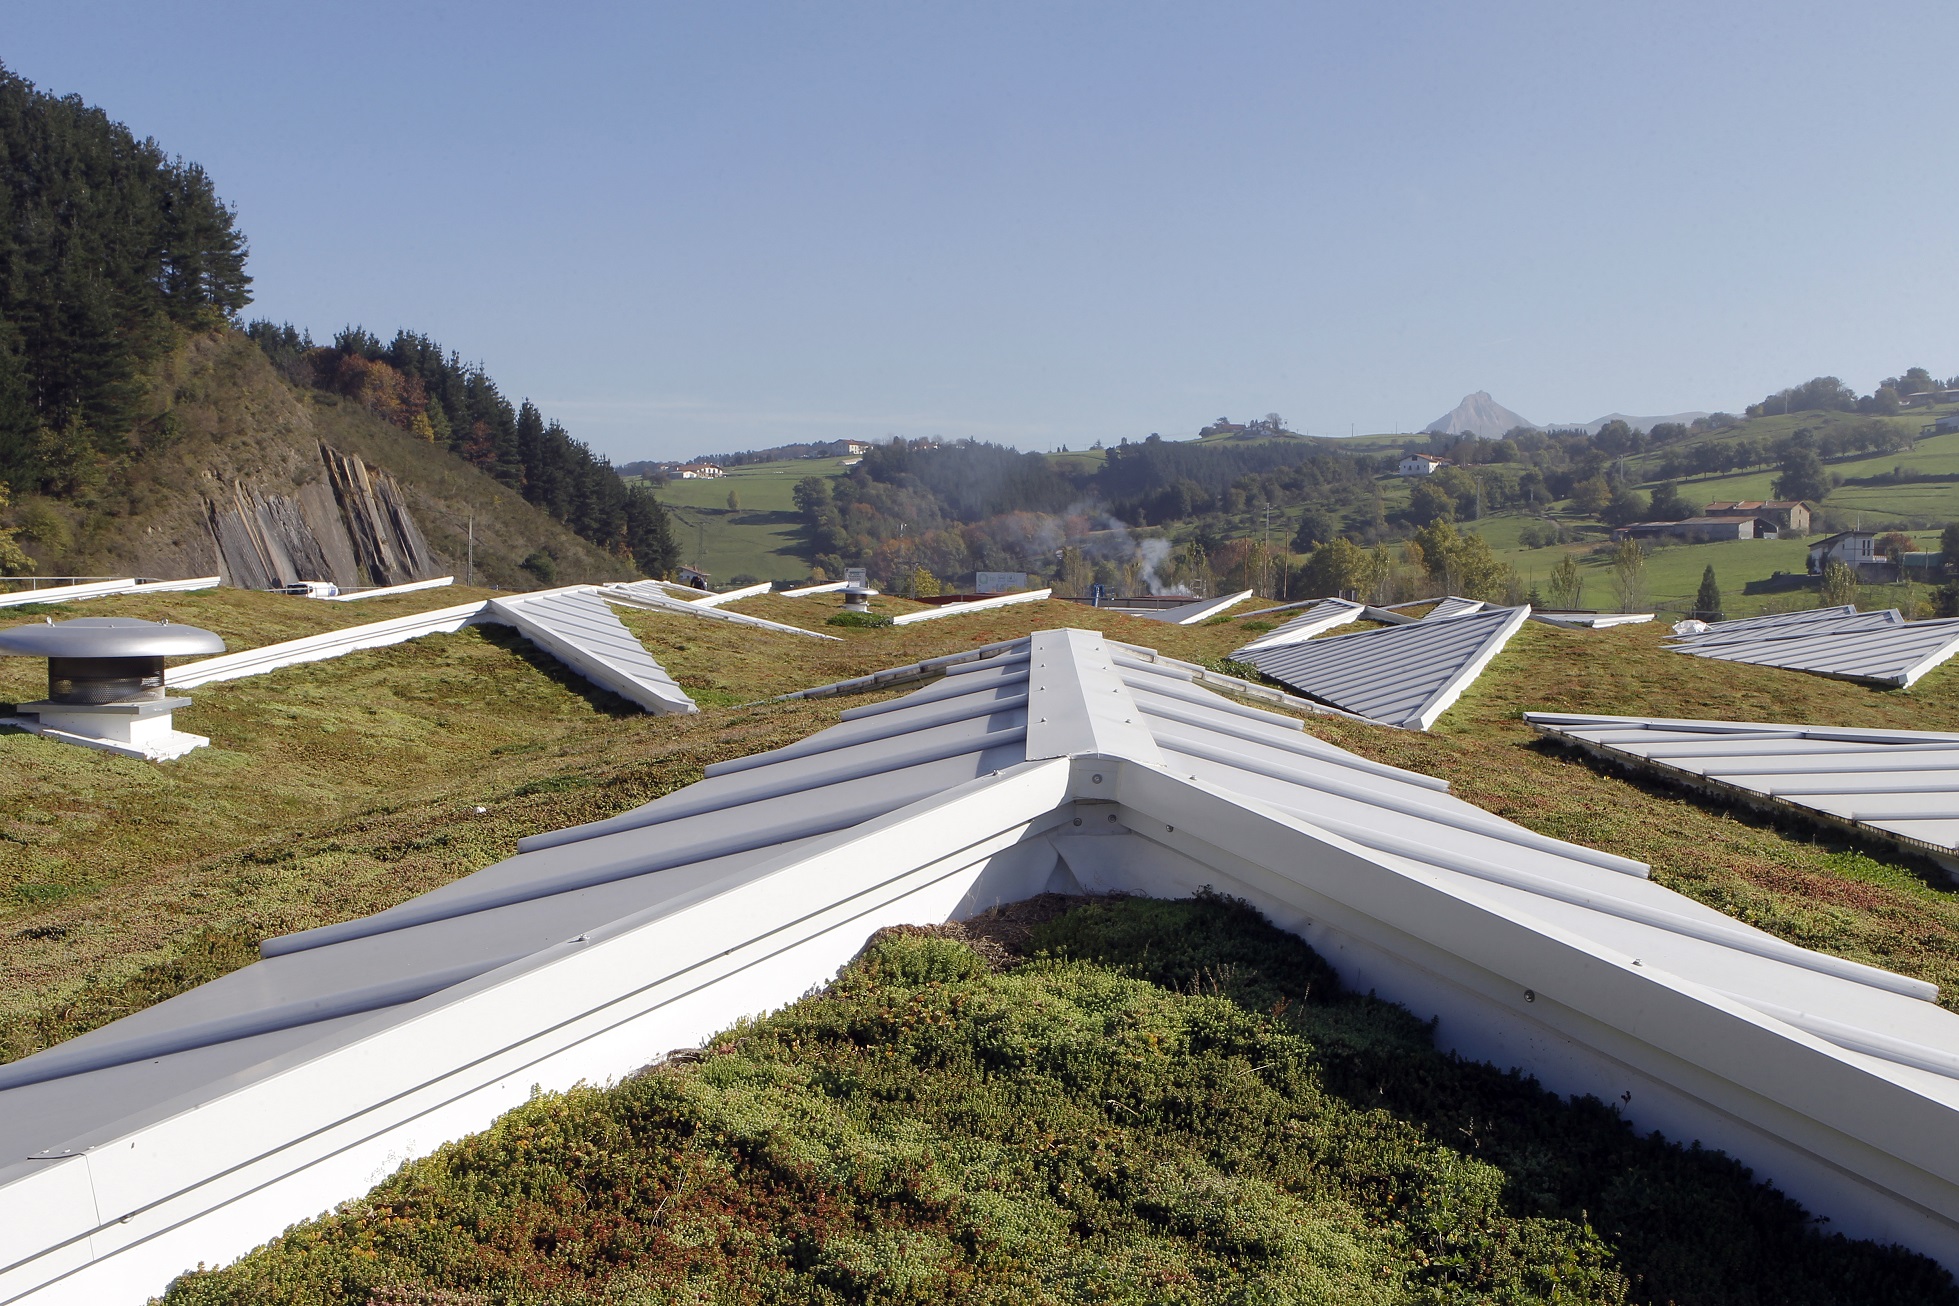 The green roof is part of AMPO's sustainabilty strategy